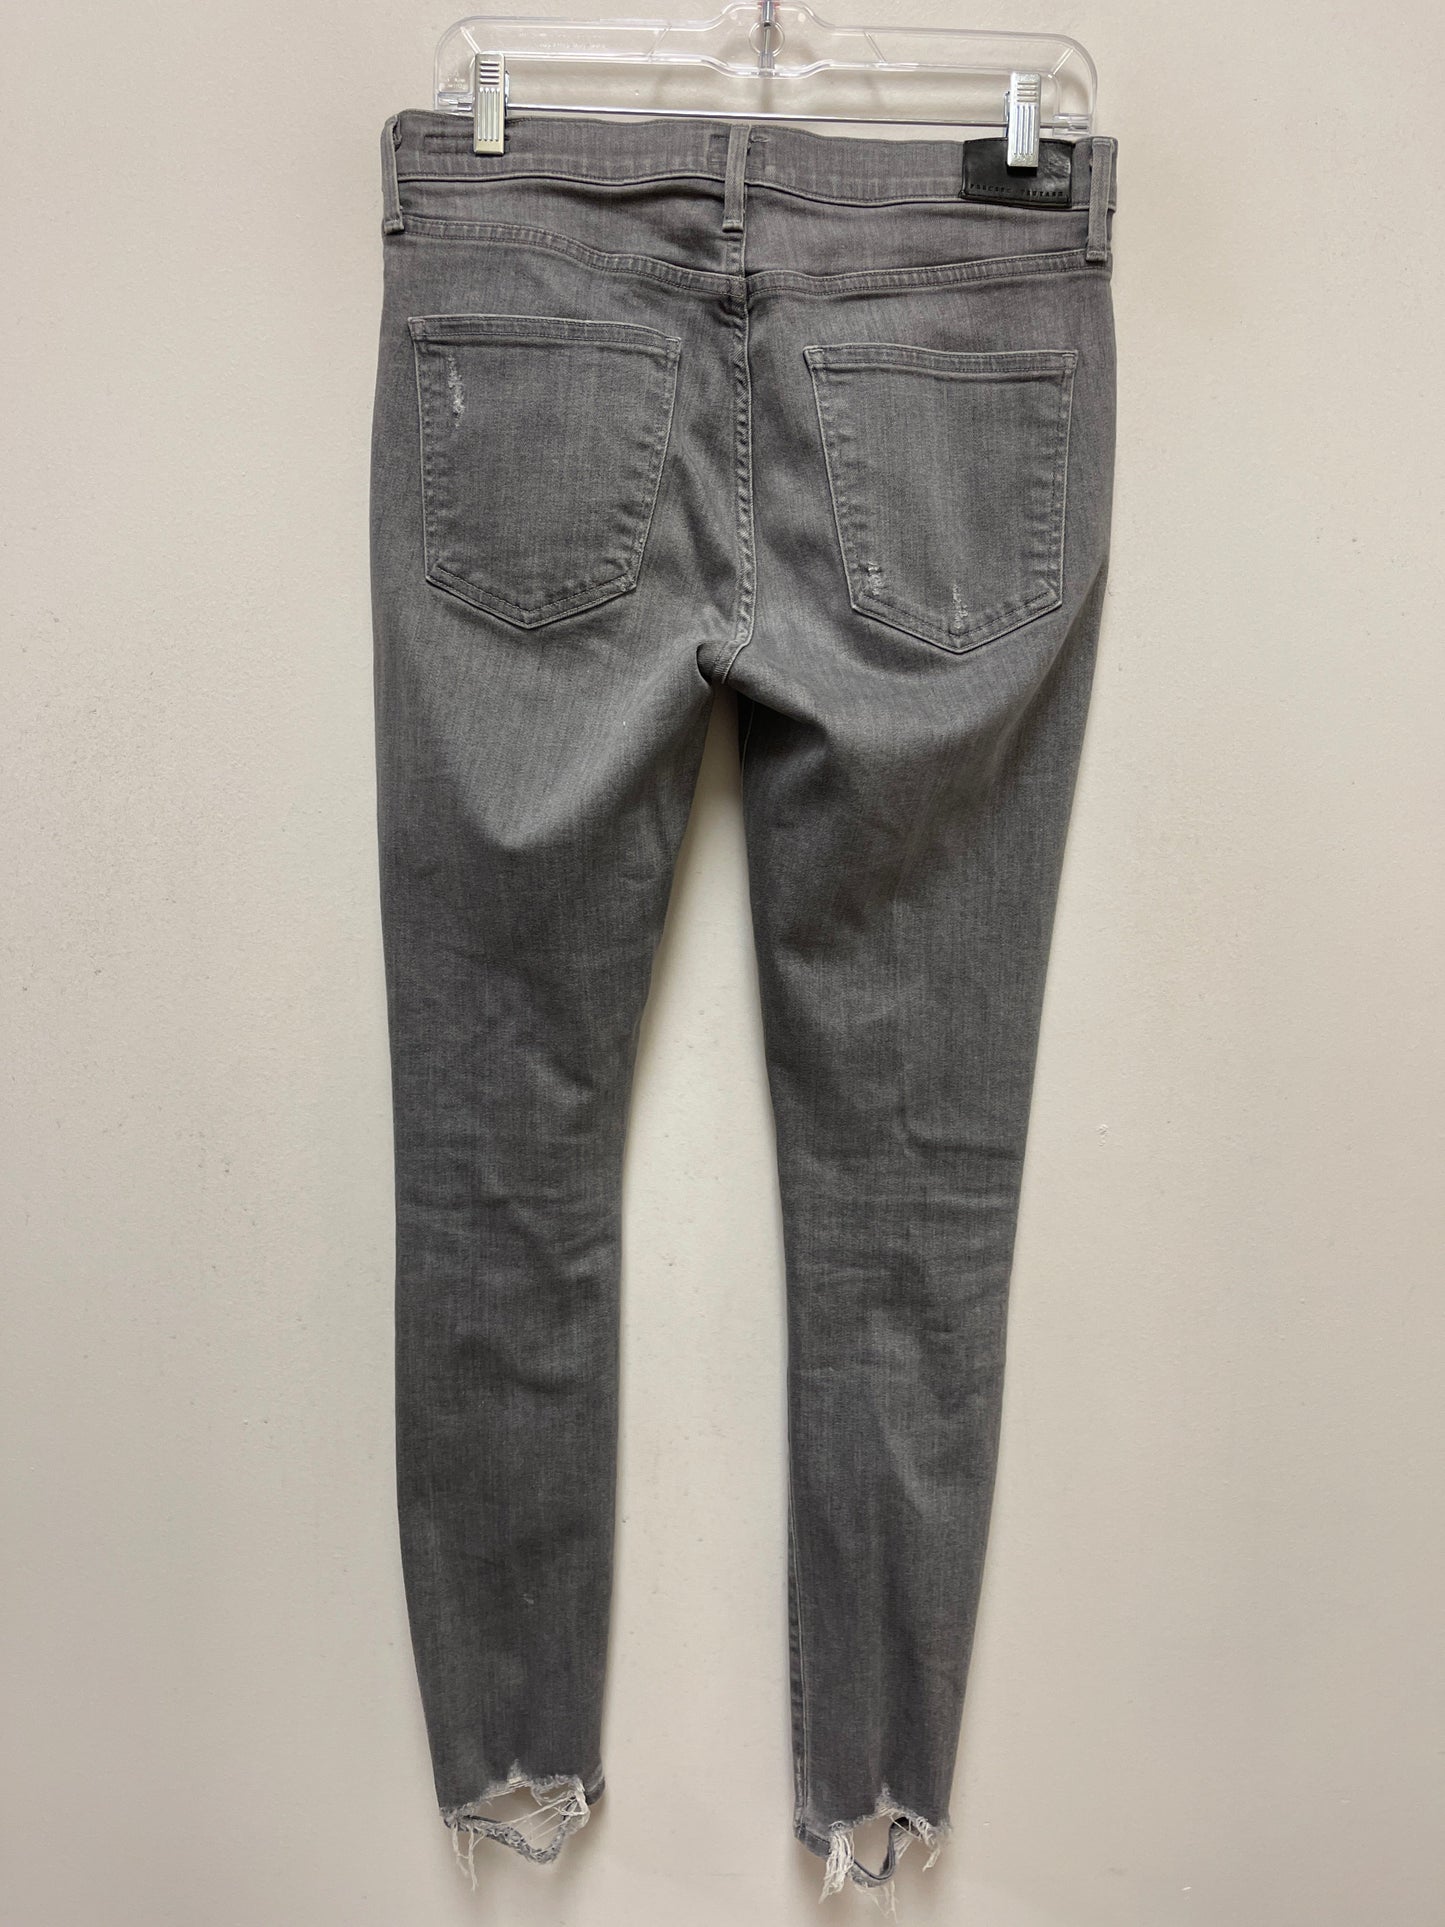 Grey Jeans Designer Citizens Of Humanity, Size 10